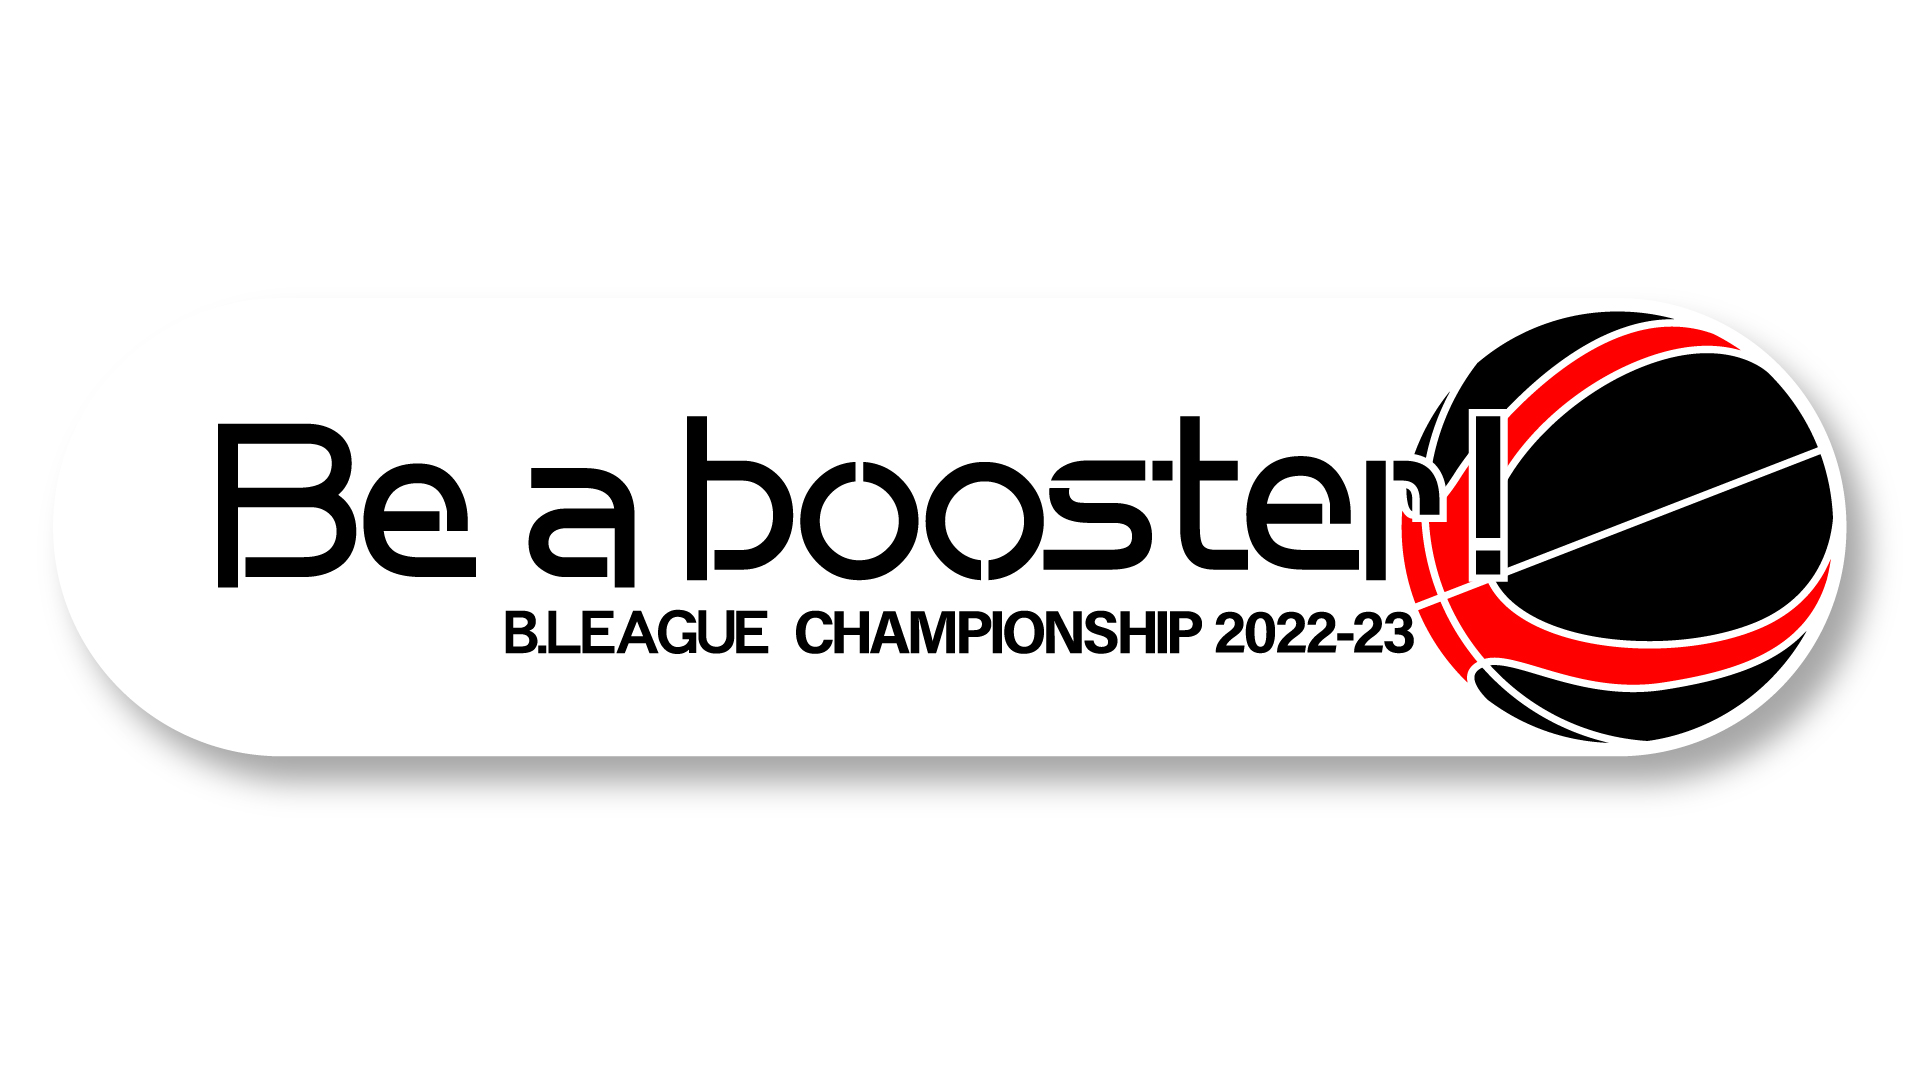 Be a booster！B.LEAGUE CHAMPIONSHIP 2022-23